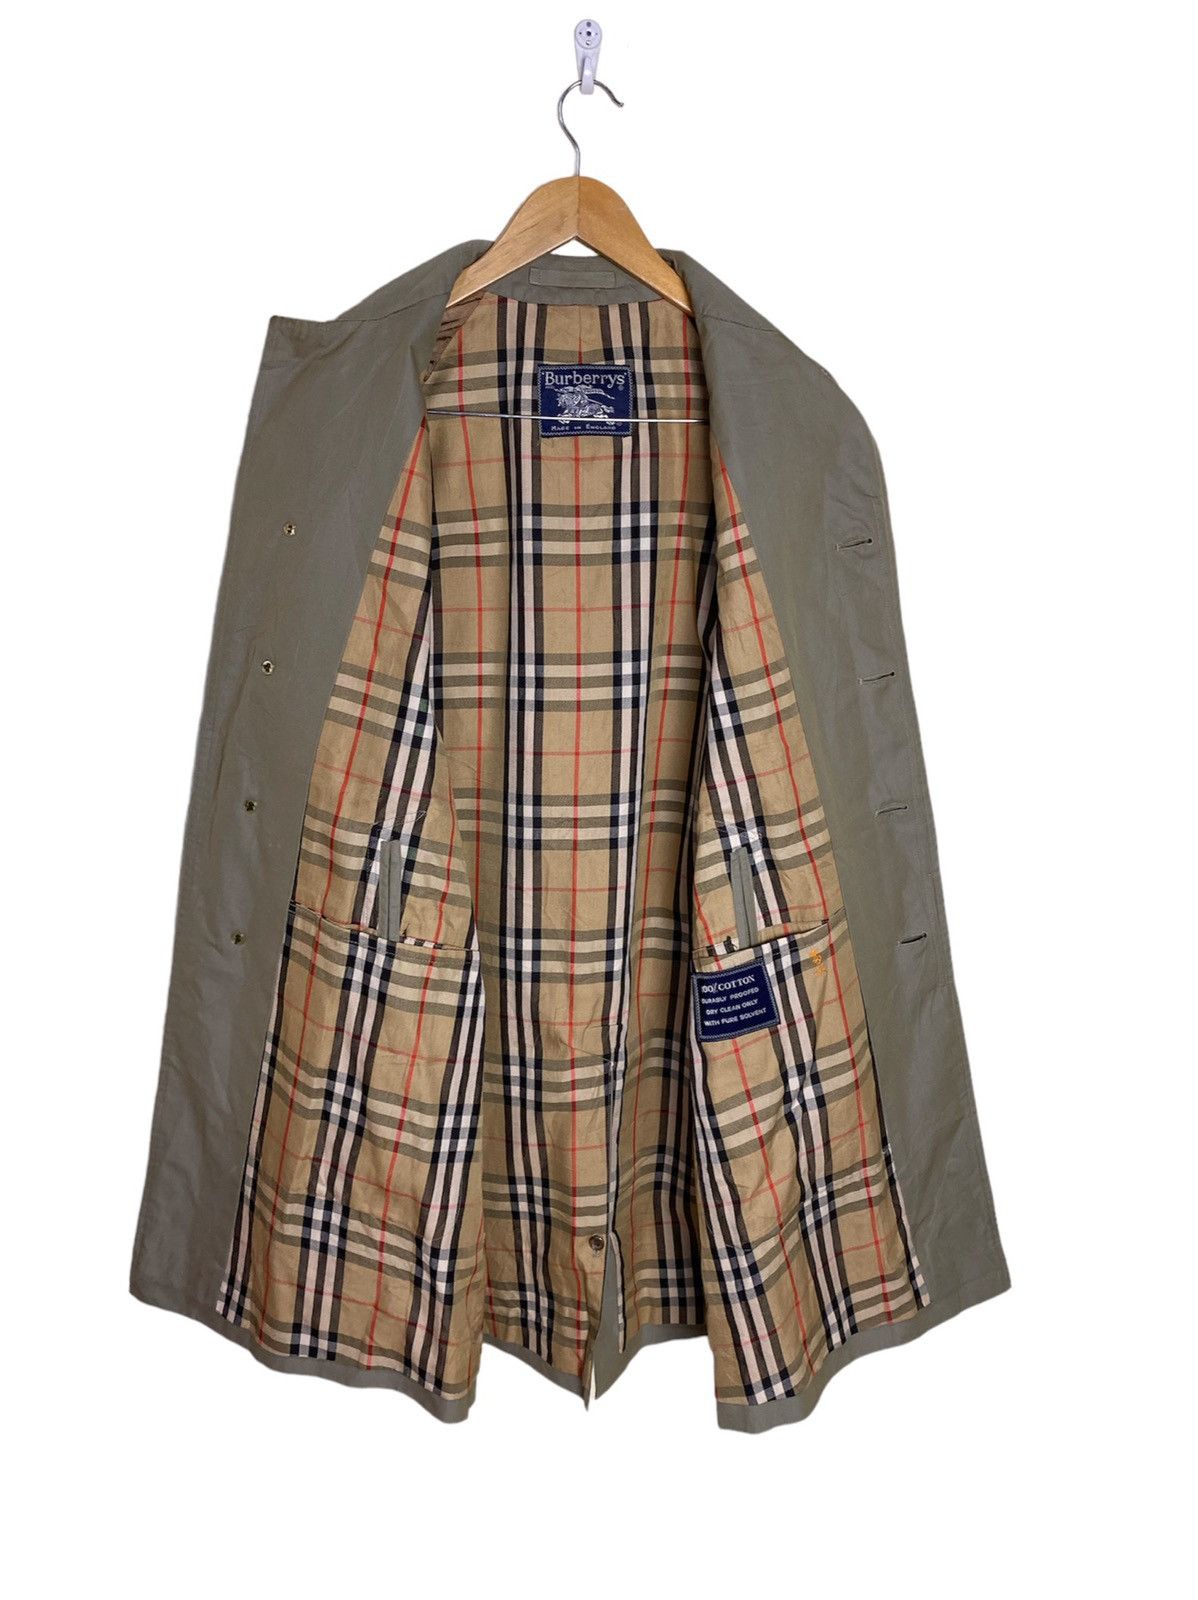 Burberry Prorsum - Vintage Burberry Trench Coat Jacket Made in England - 4